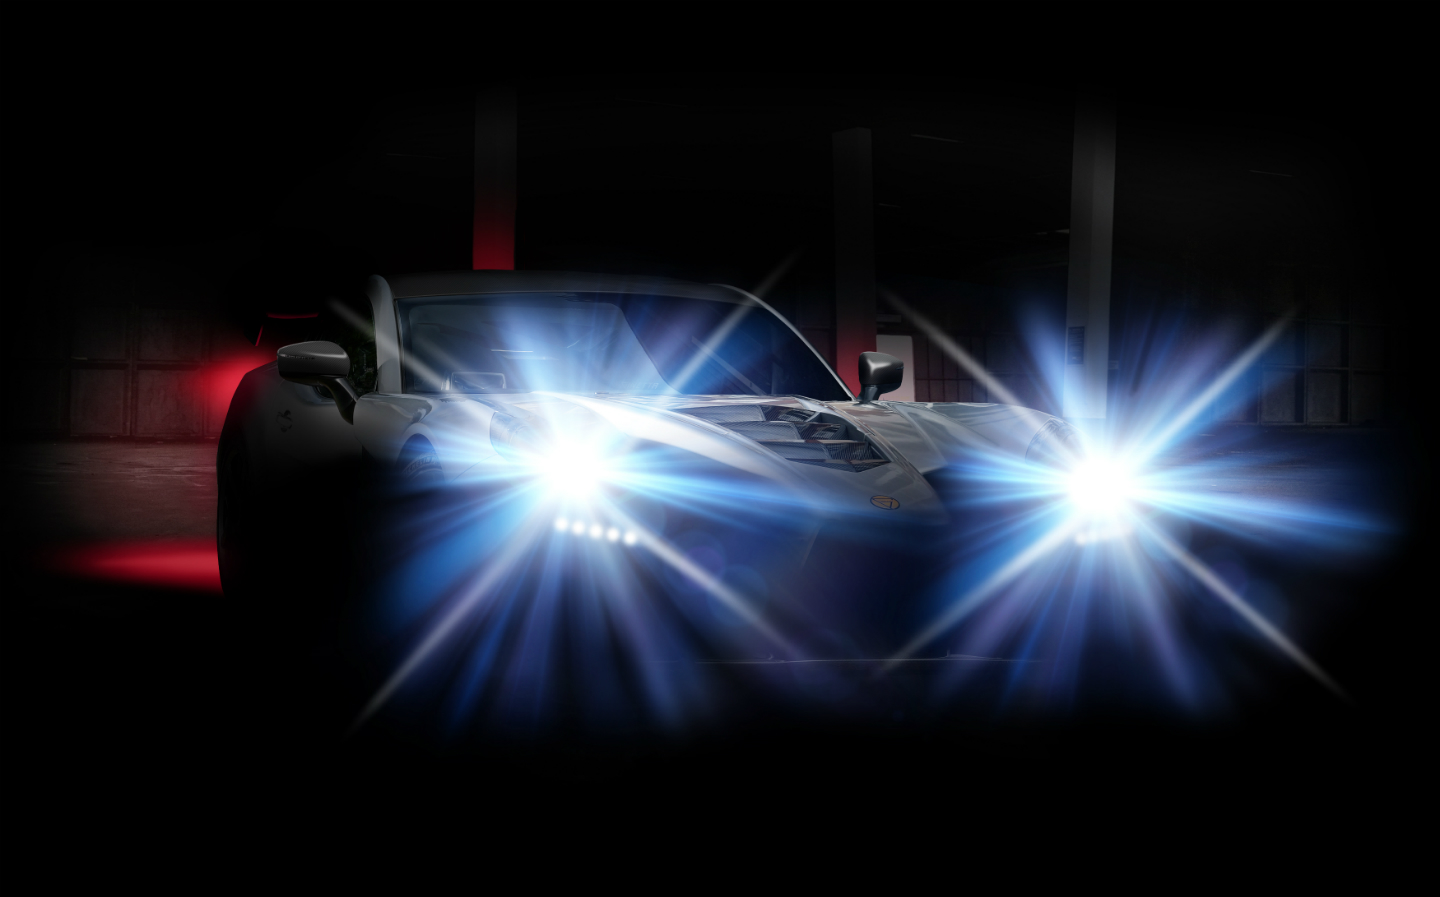 Ginetta has a "race-derived" carbon fibre supercar in the works